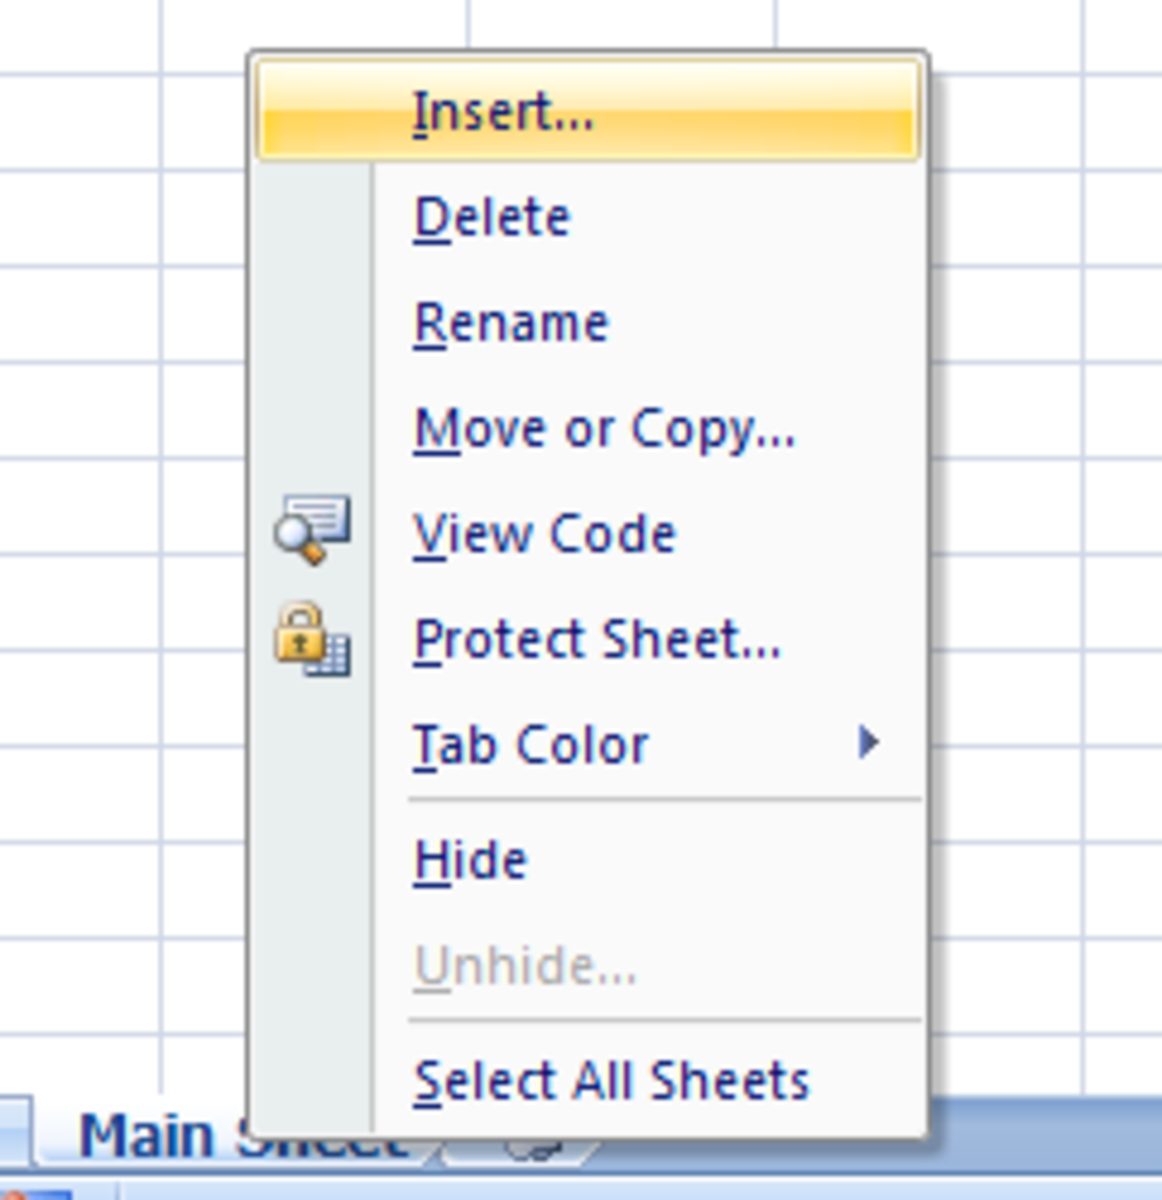 excel-vba-guide-to-creating-a-new-sheet-everyday-automatically